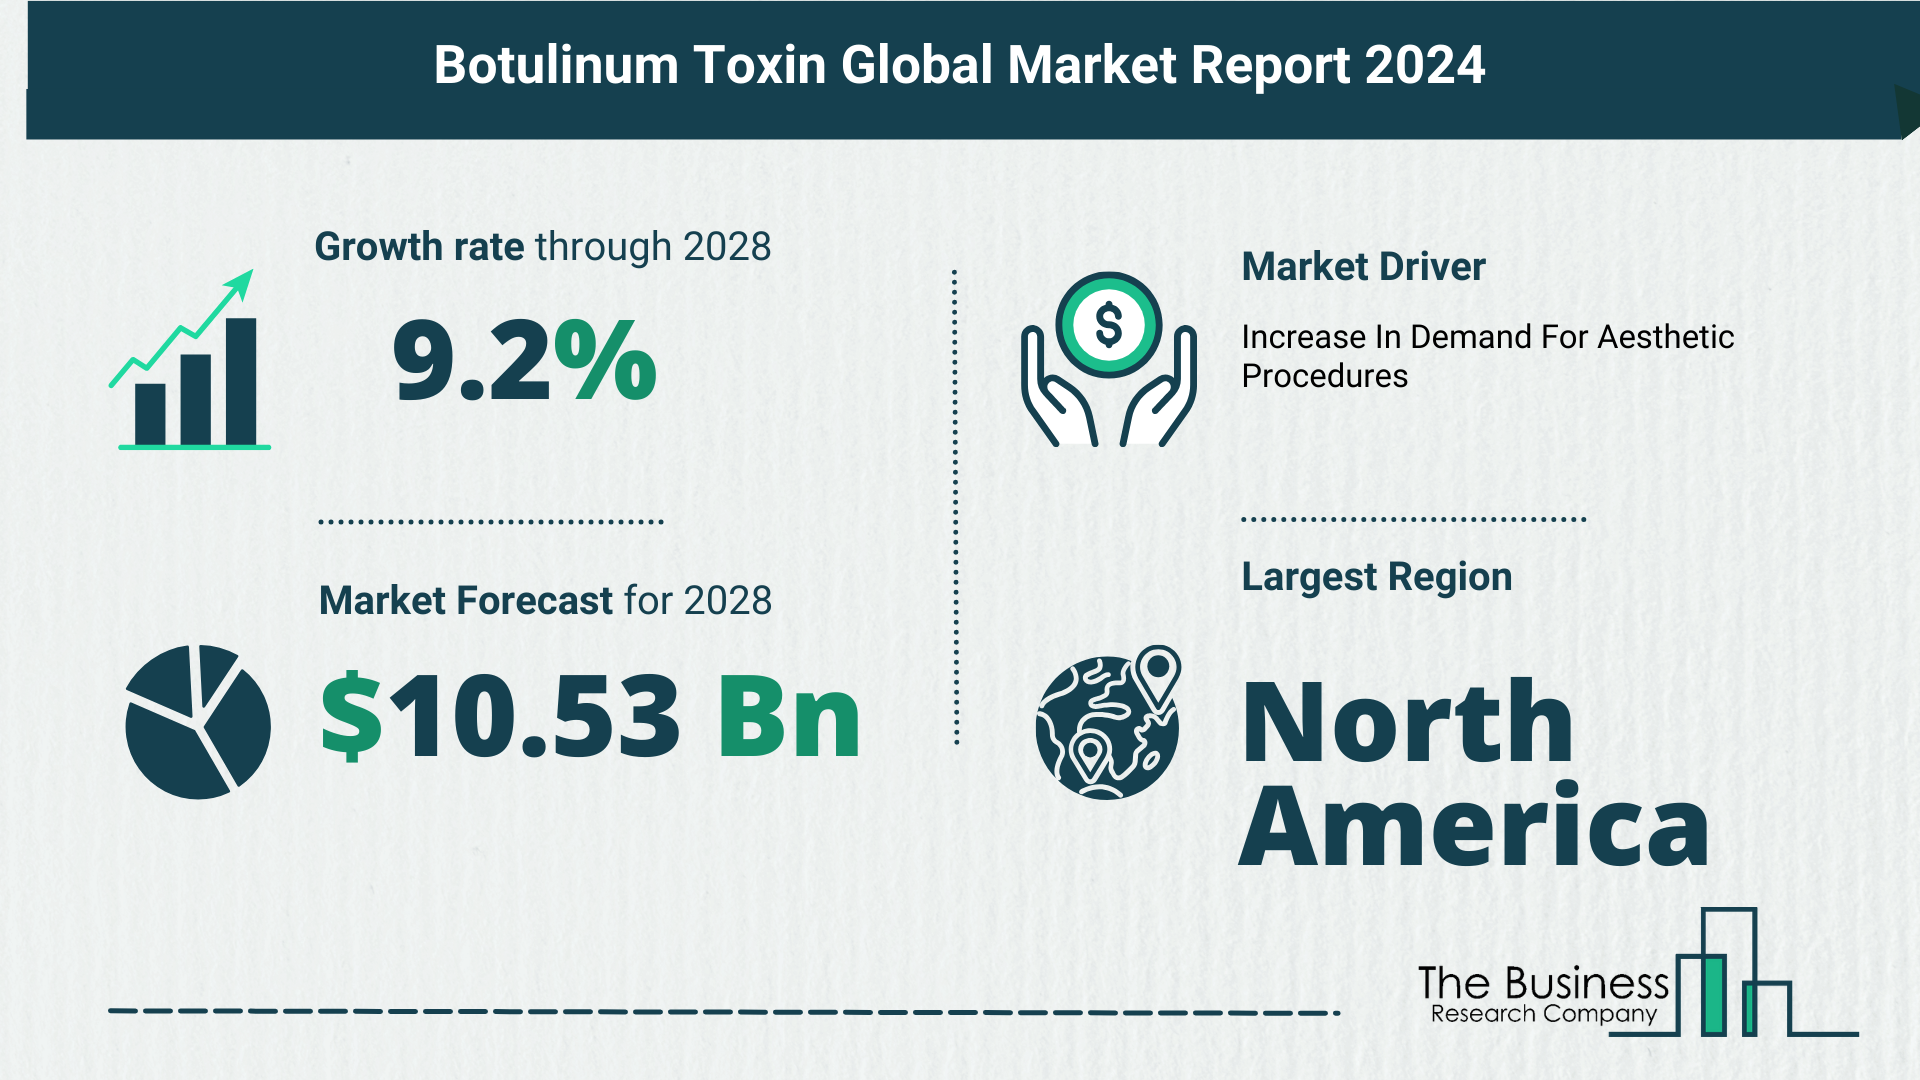 Key Insights On The Botulinum Toxin Market 2024 – Size, Driver, And Major Players